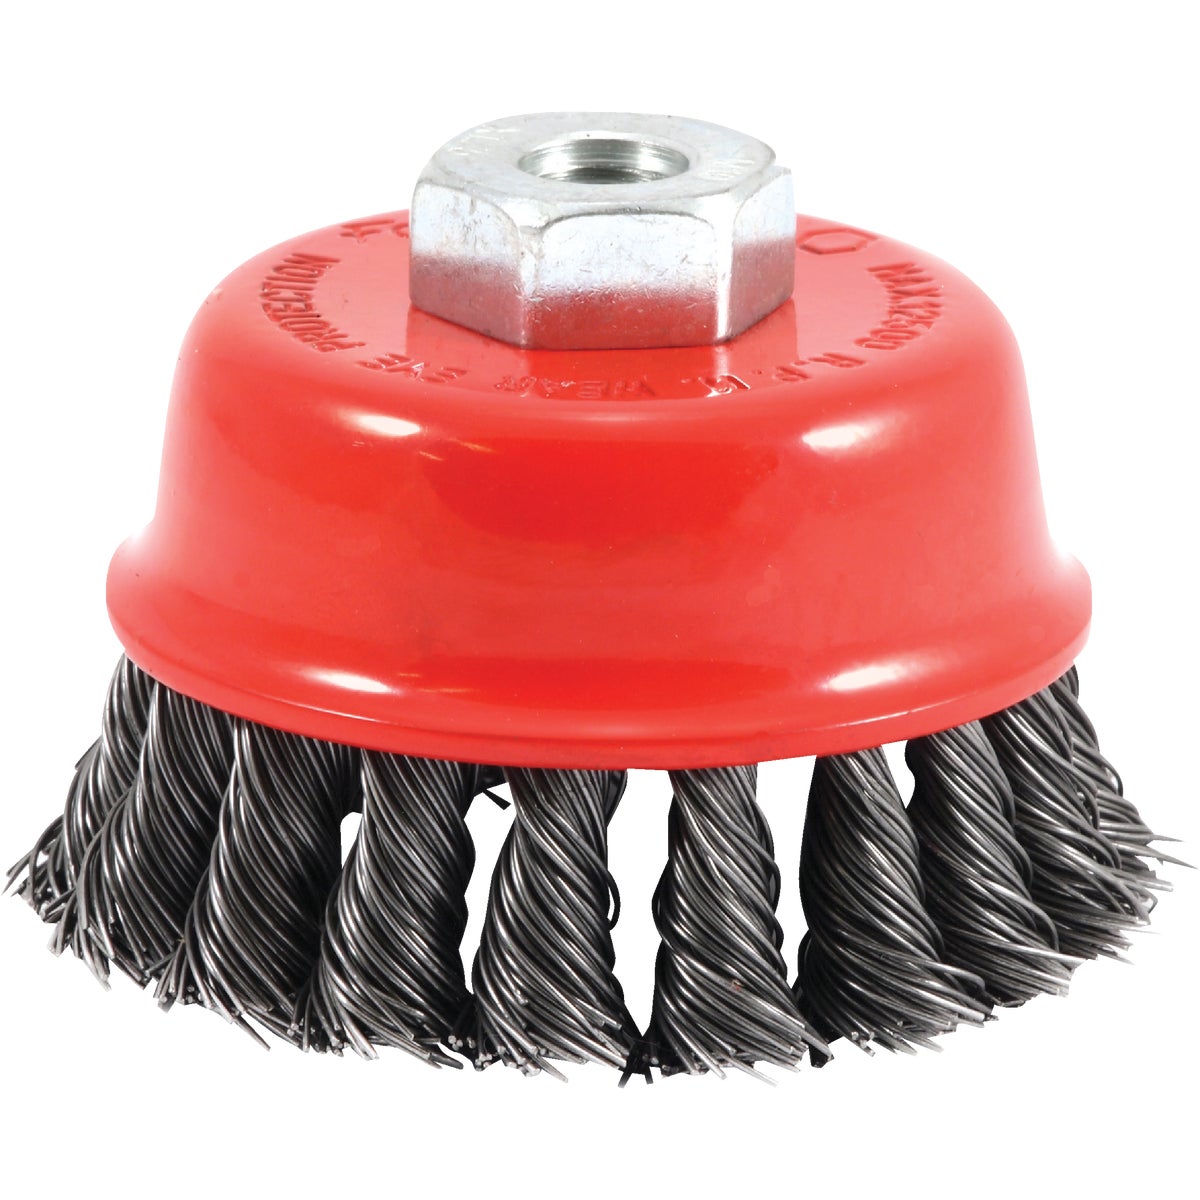 Forney 72782 Forney 2-3/4 In. Knotted .020 In. Angle Grinder Wire Brush 72782